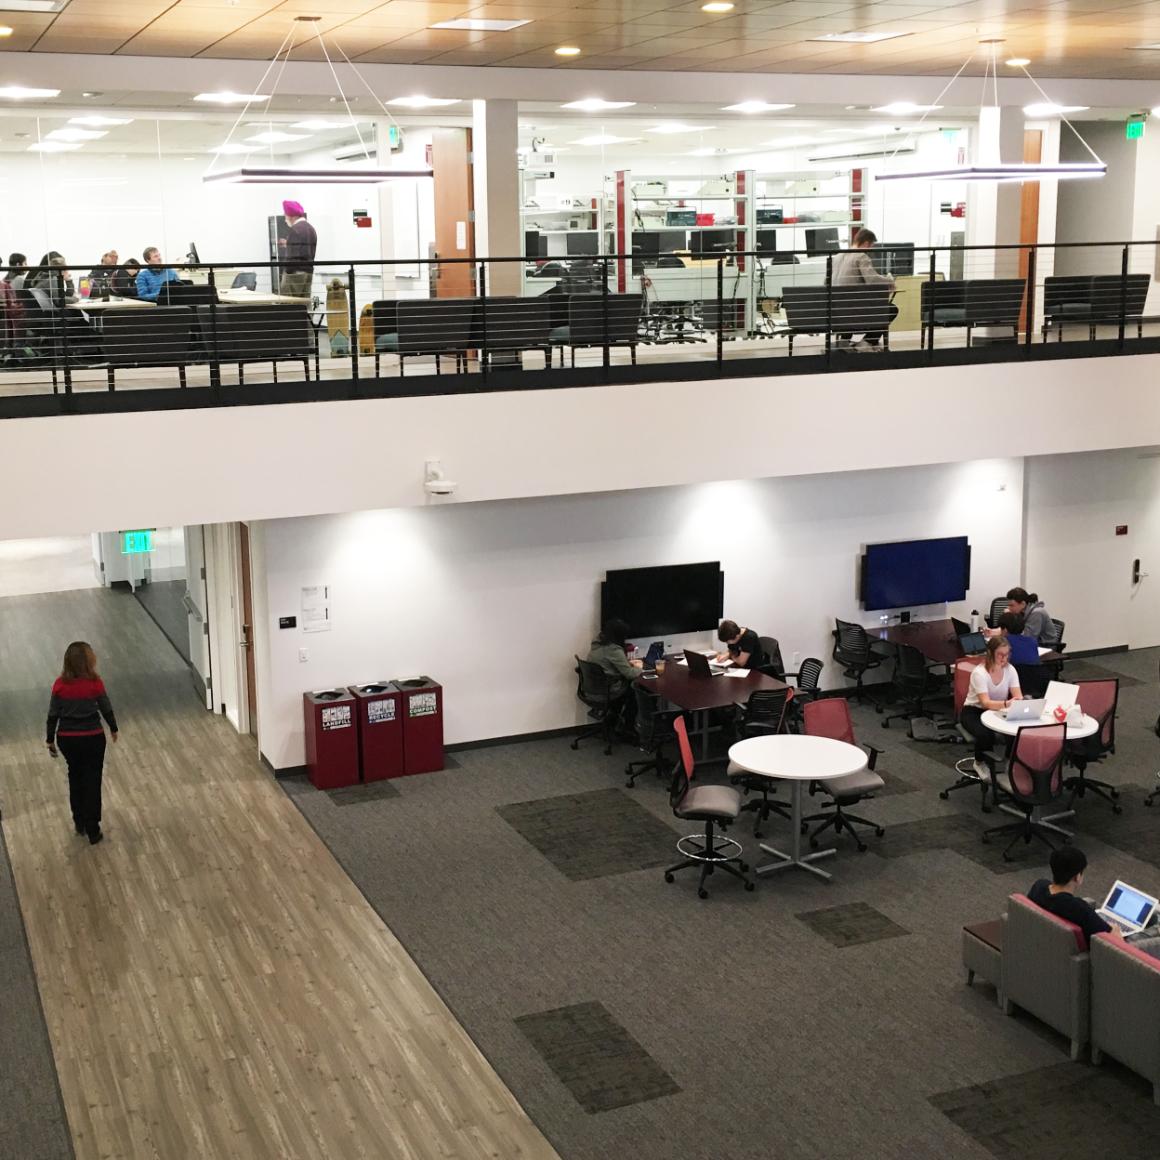 Classroom, lab, study, and collaboration space coexist nicely in Engineering's new digs.